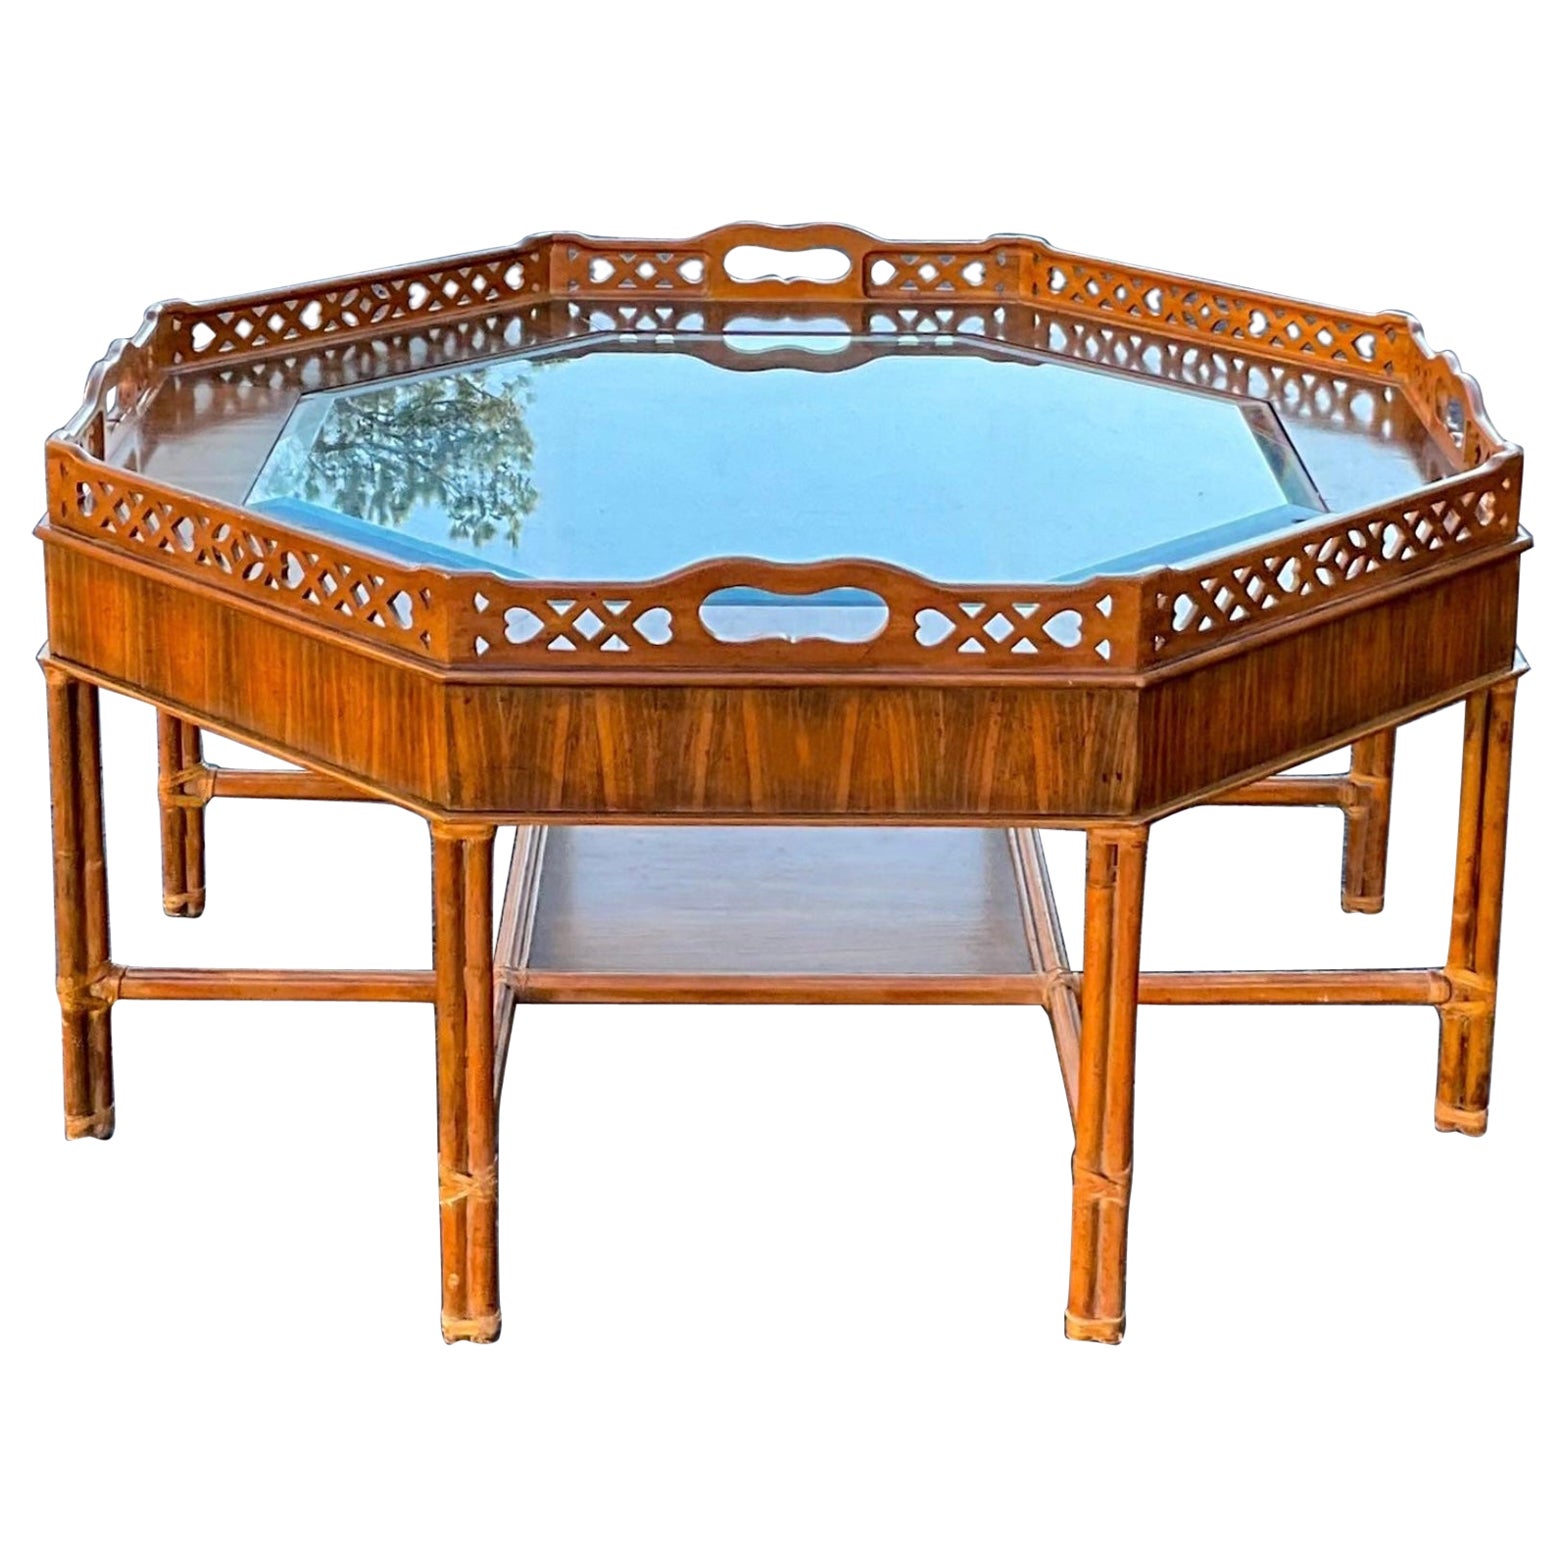 Maitland-Smith Chippendale Style Coffee Table With Fretwork And Rattan Base 